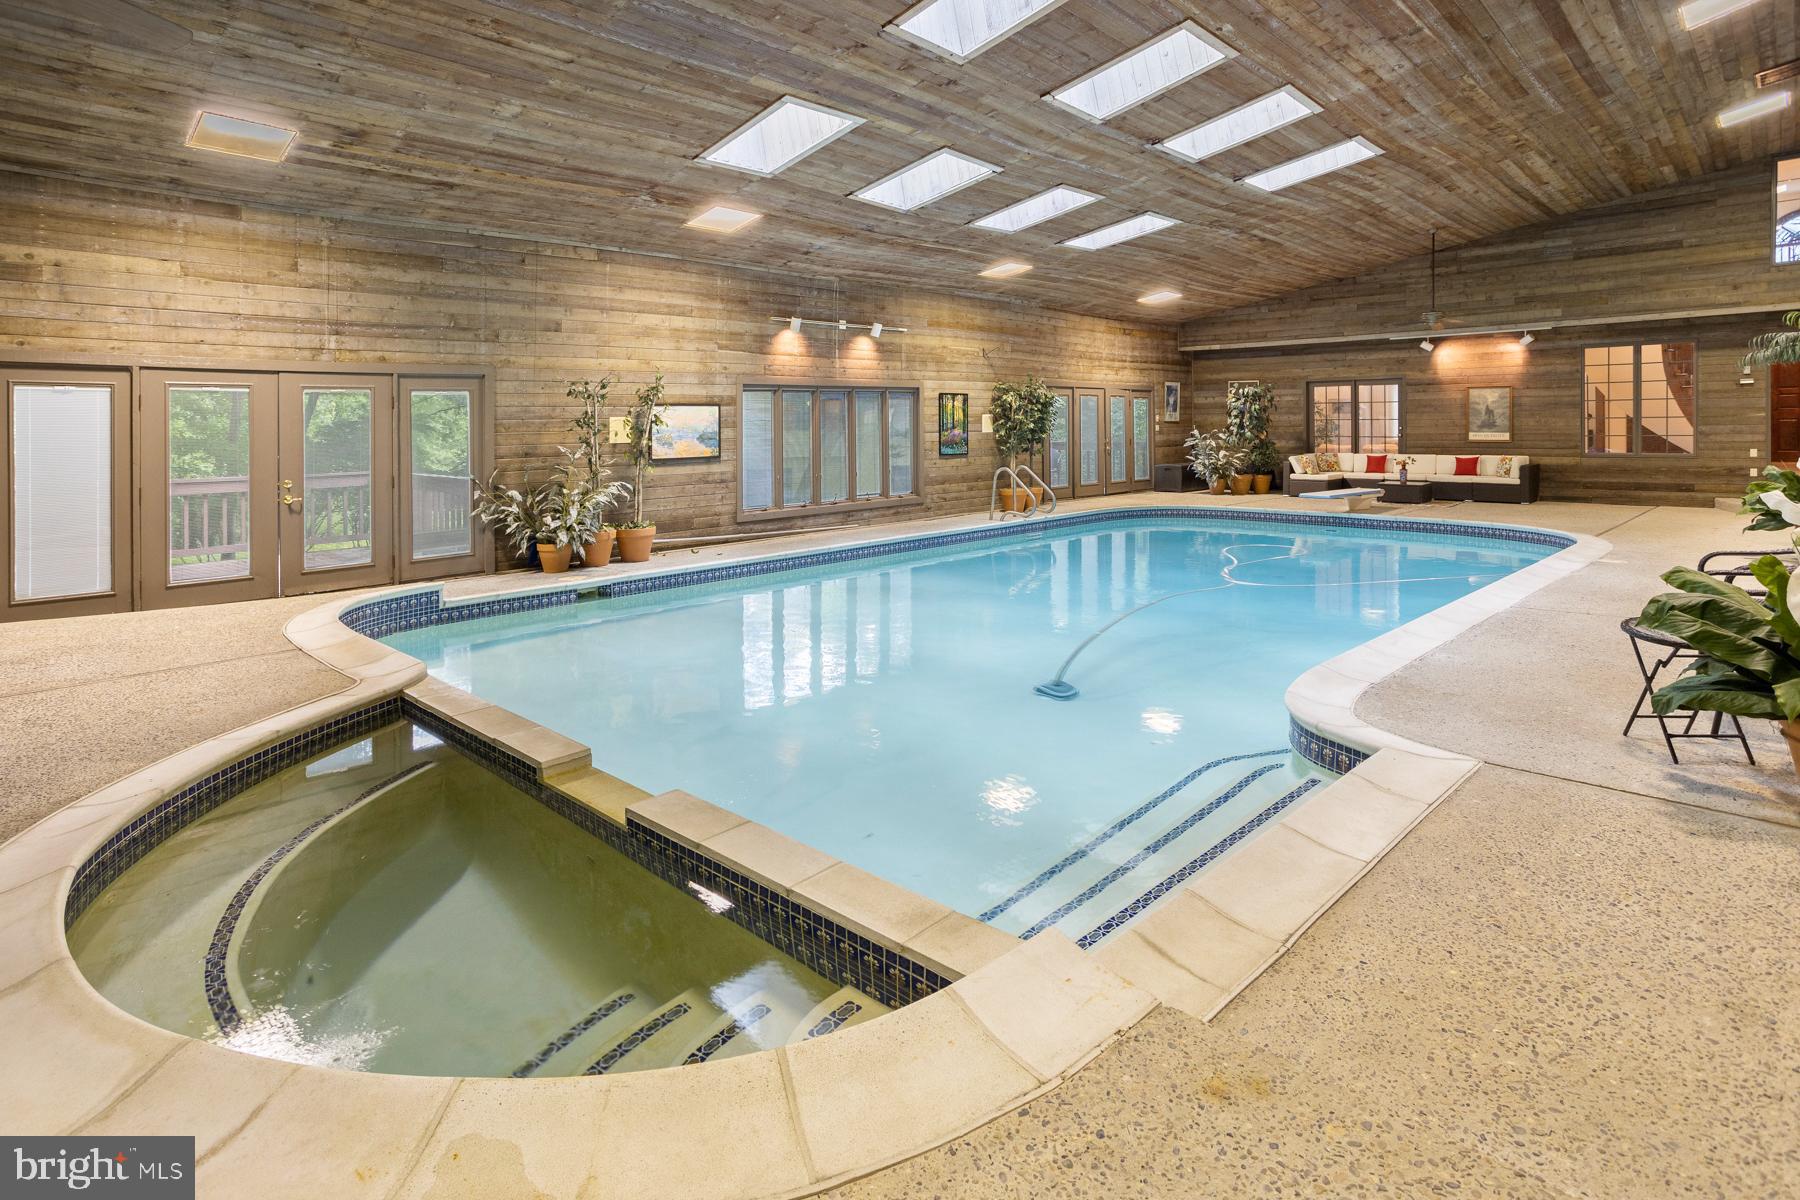 a view of a indoor swimming pool